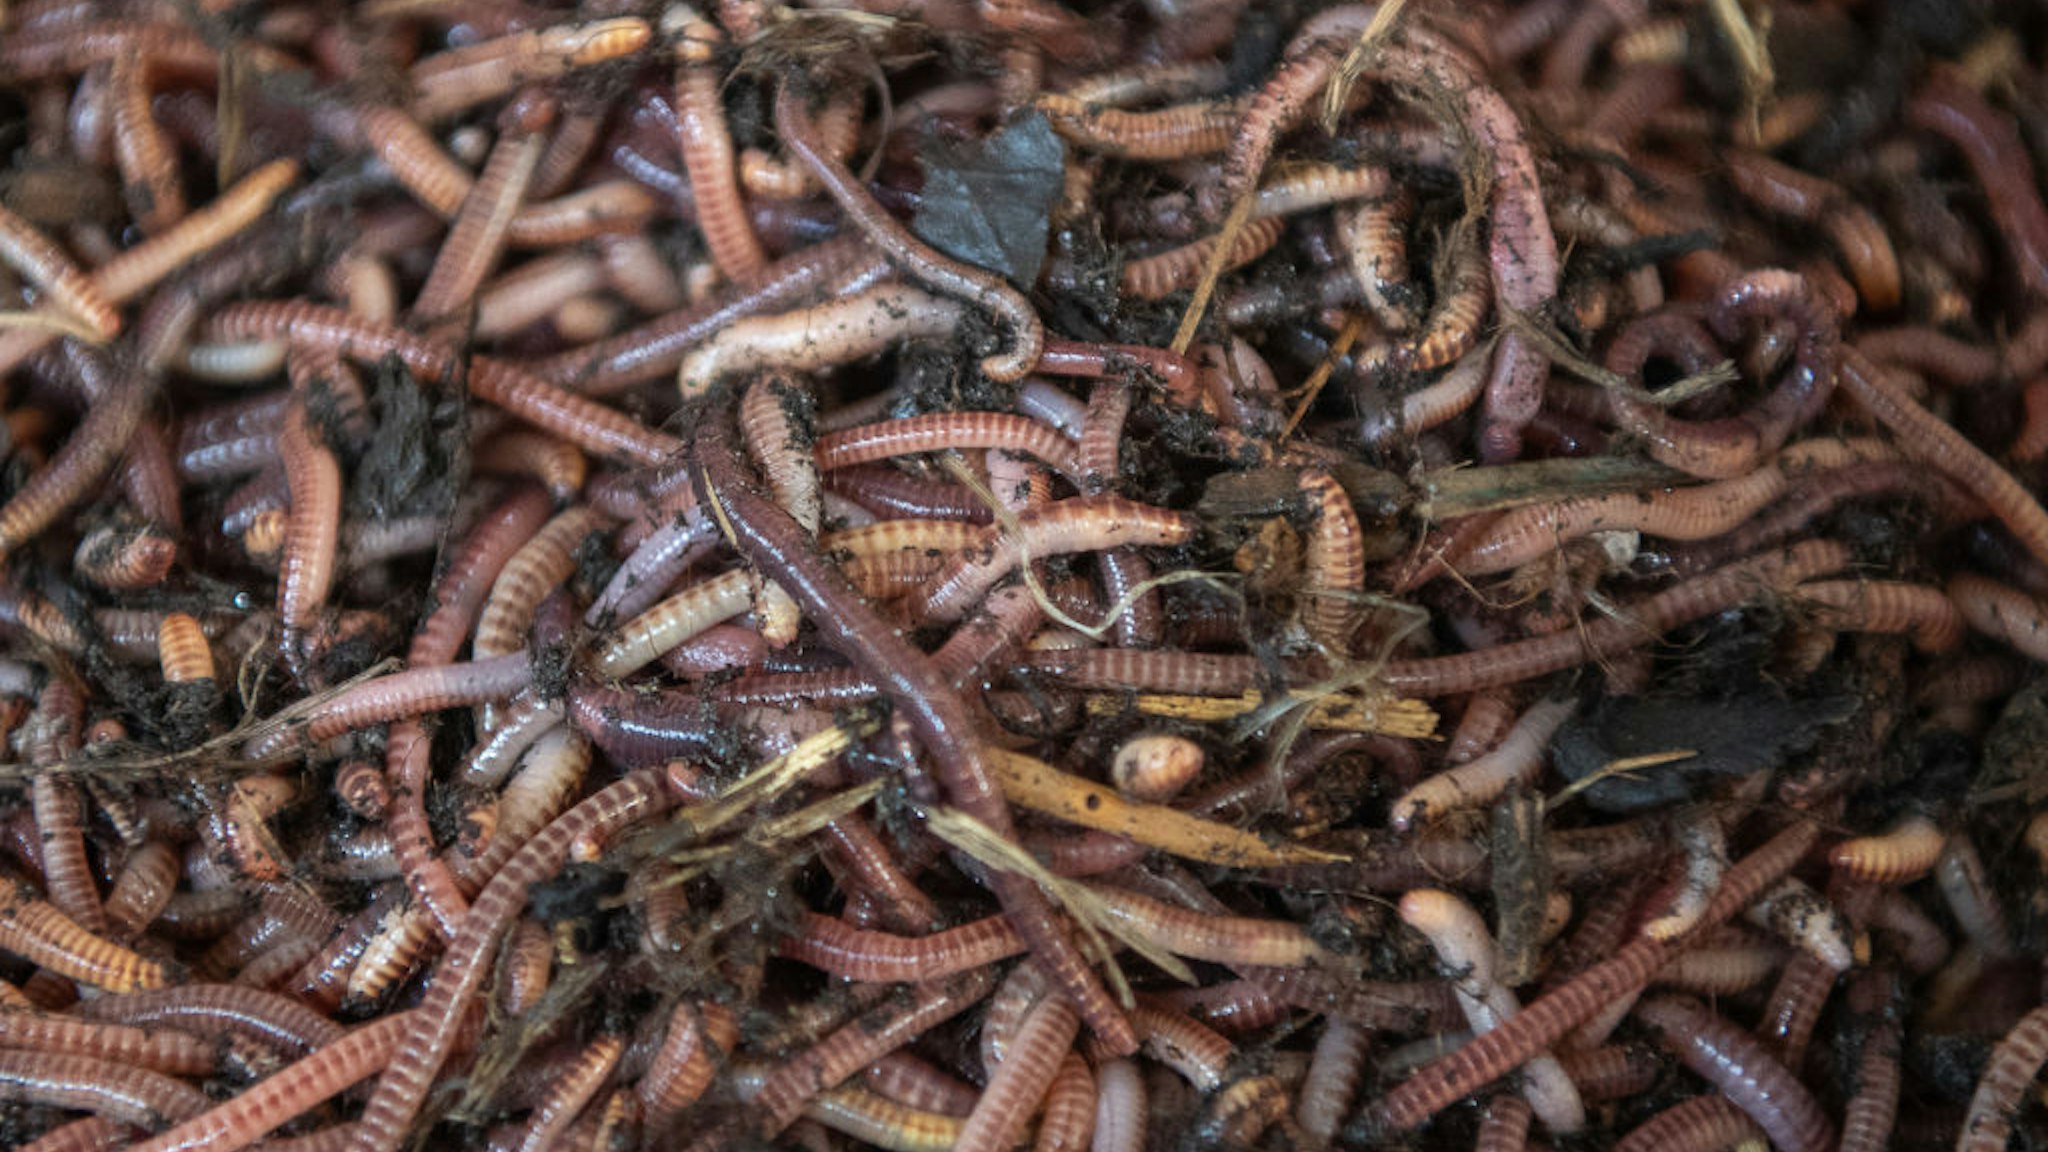 The earthworm's evil twin, the Asian Jumping Worm, has invaded California.